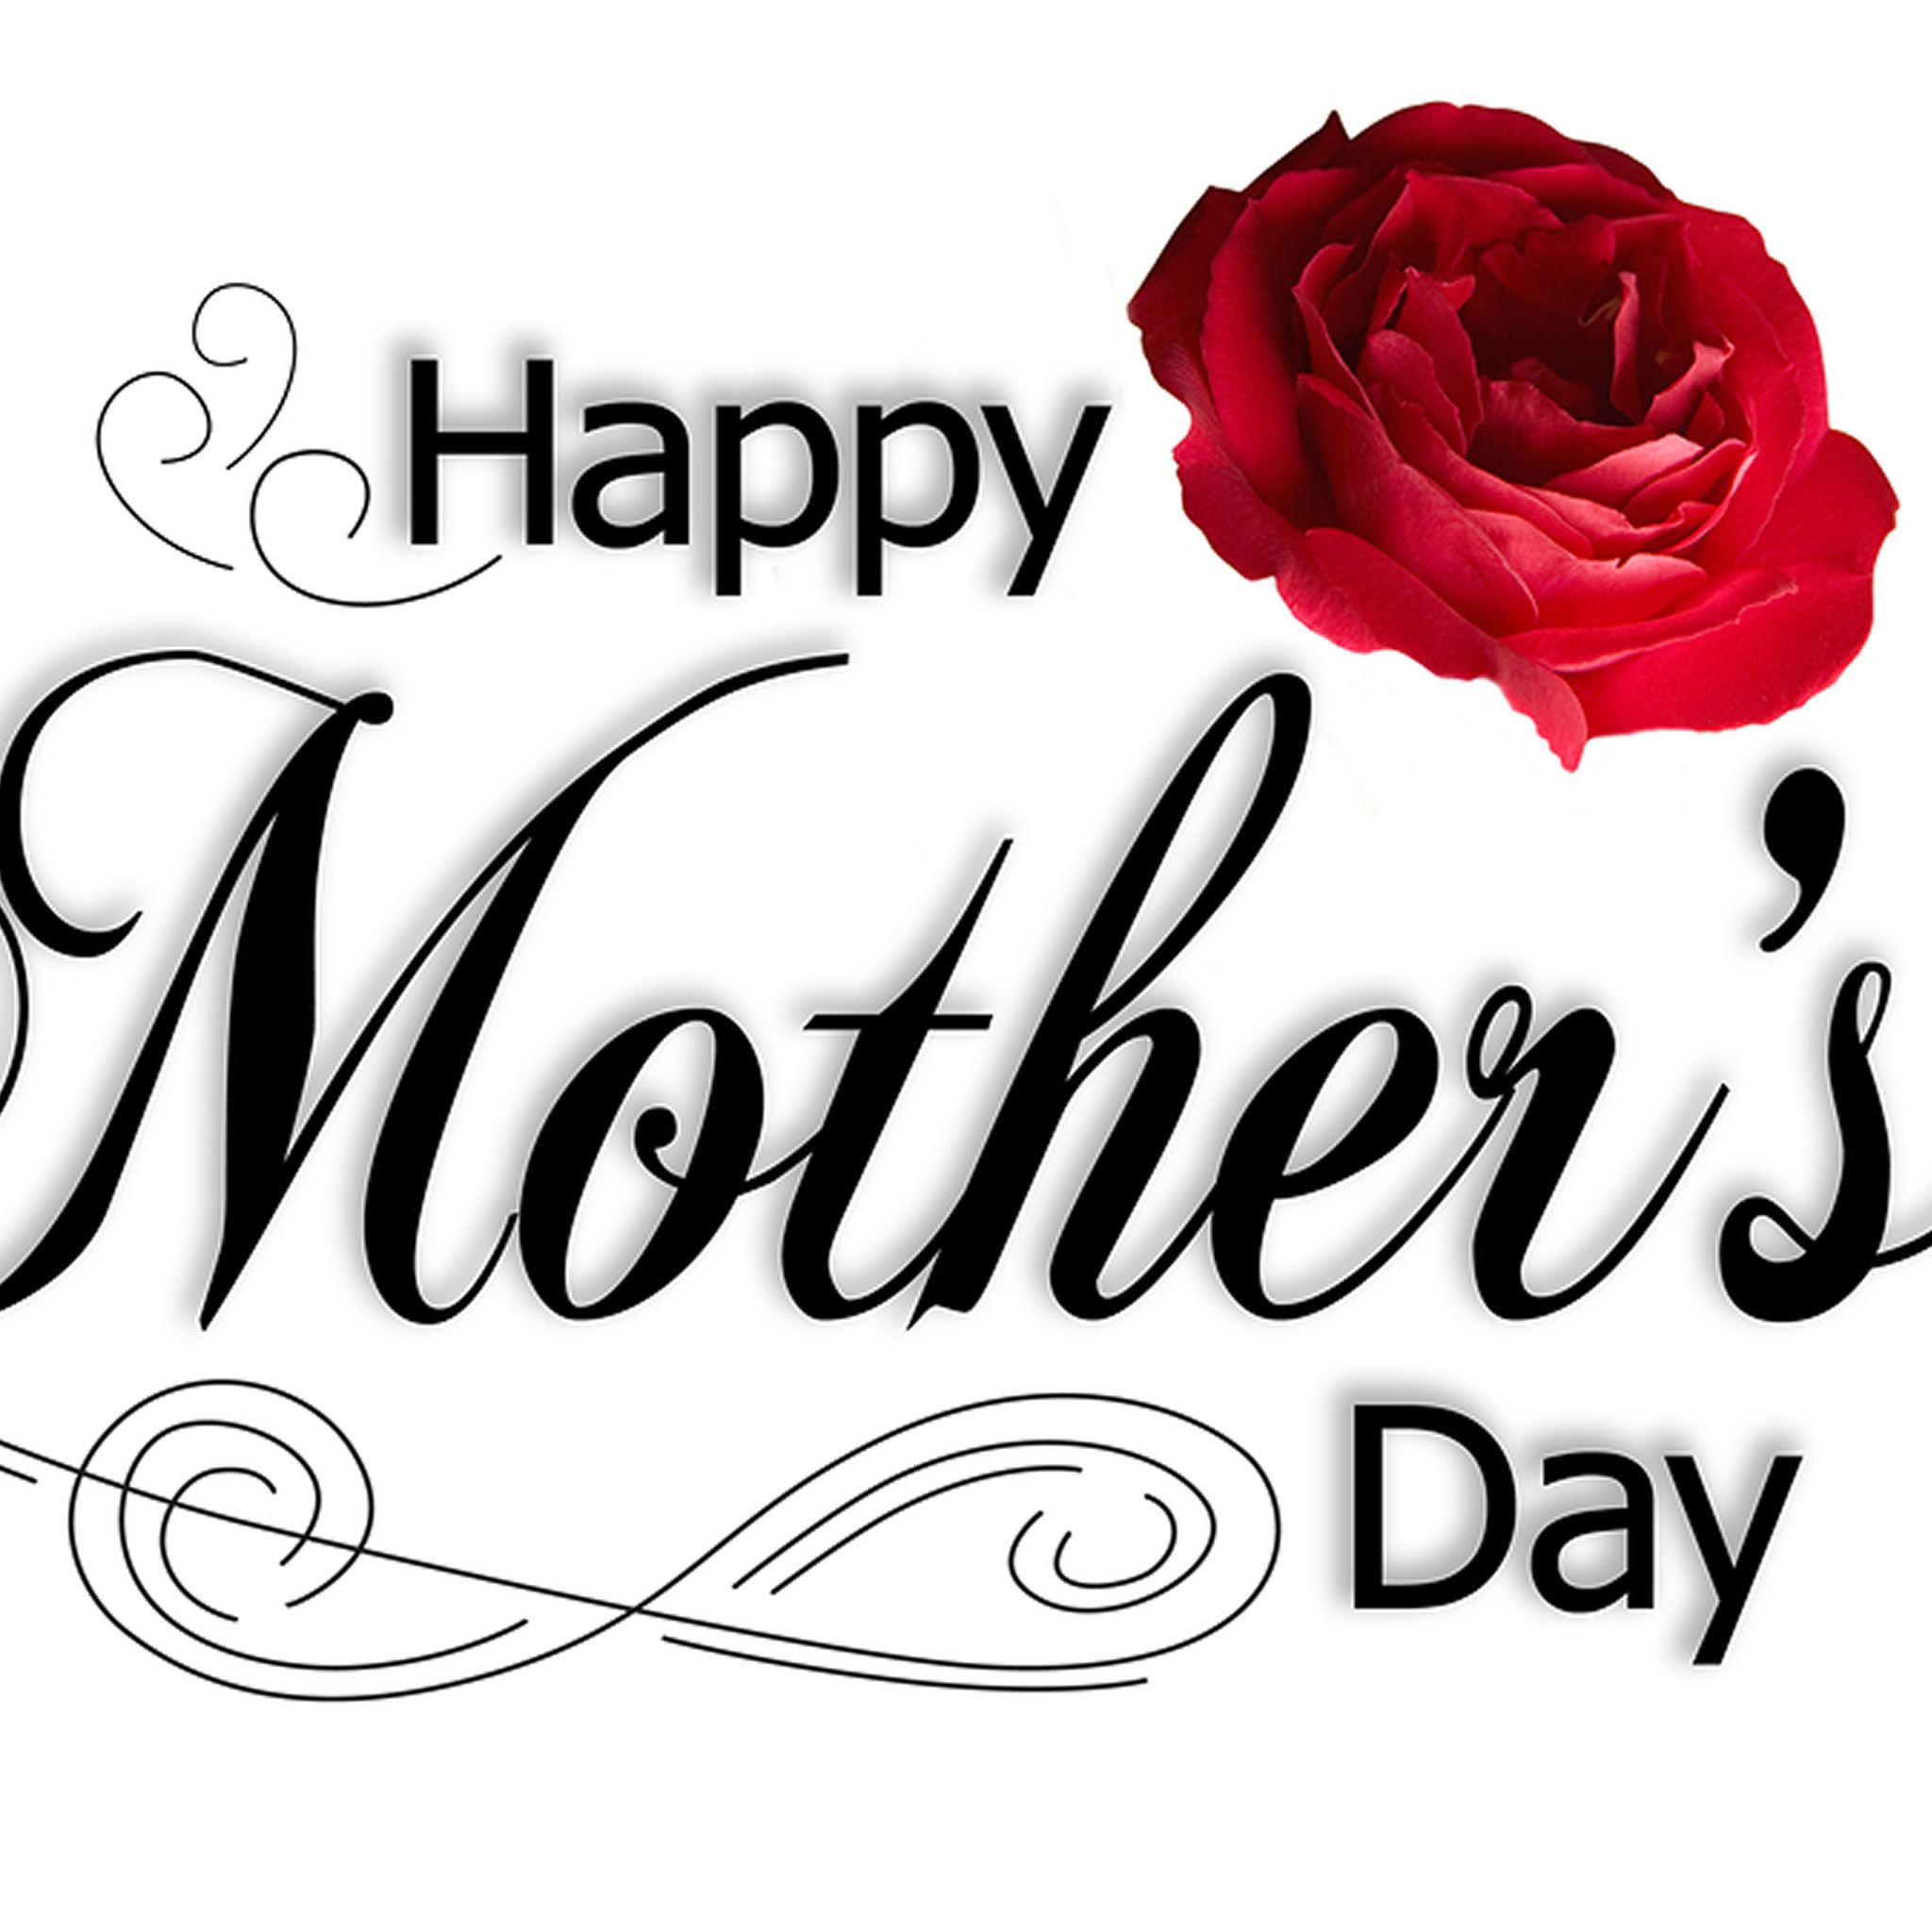 Happy Mother's Day iPad Air wallpaper 